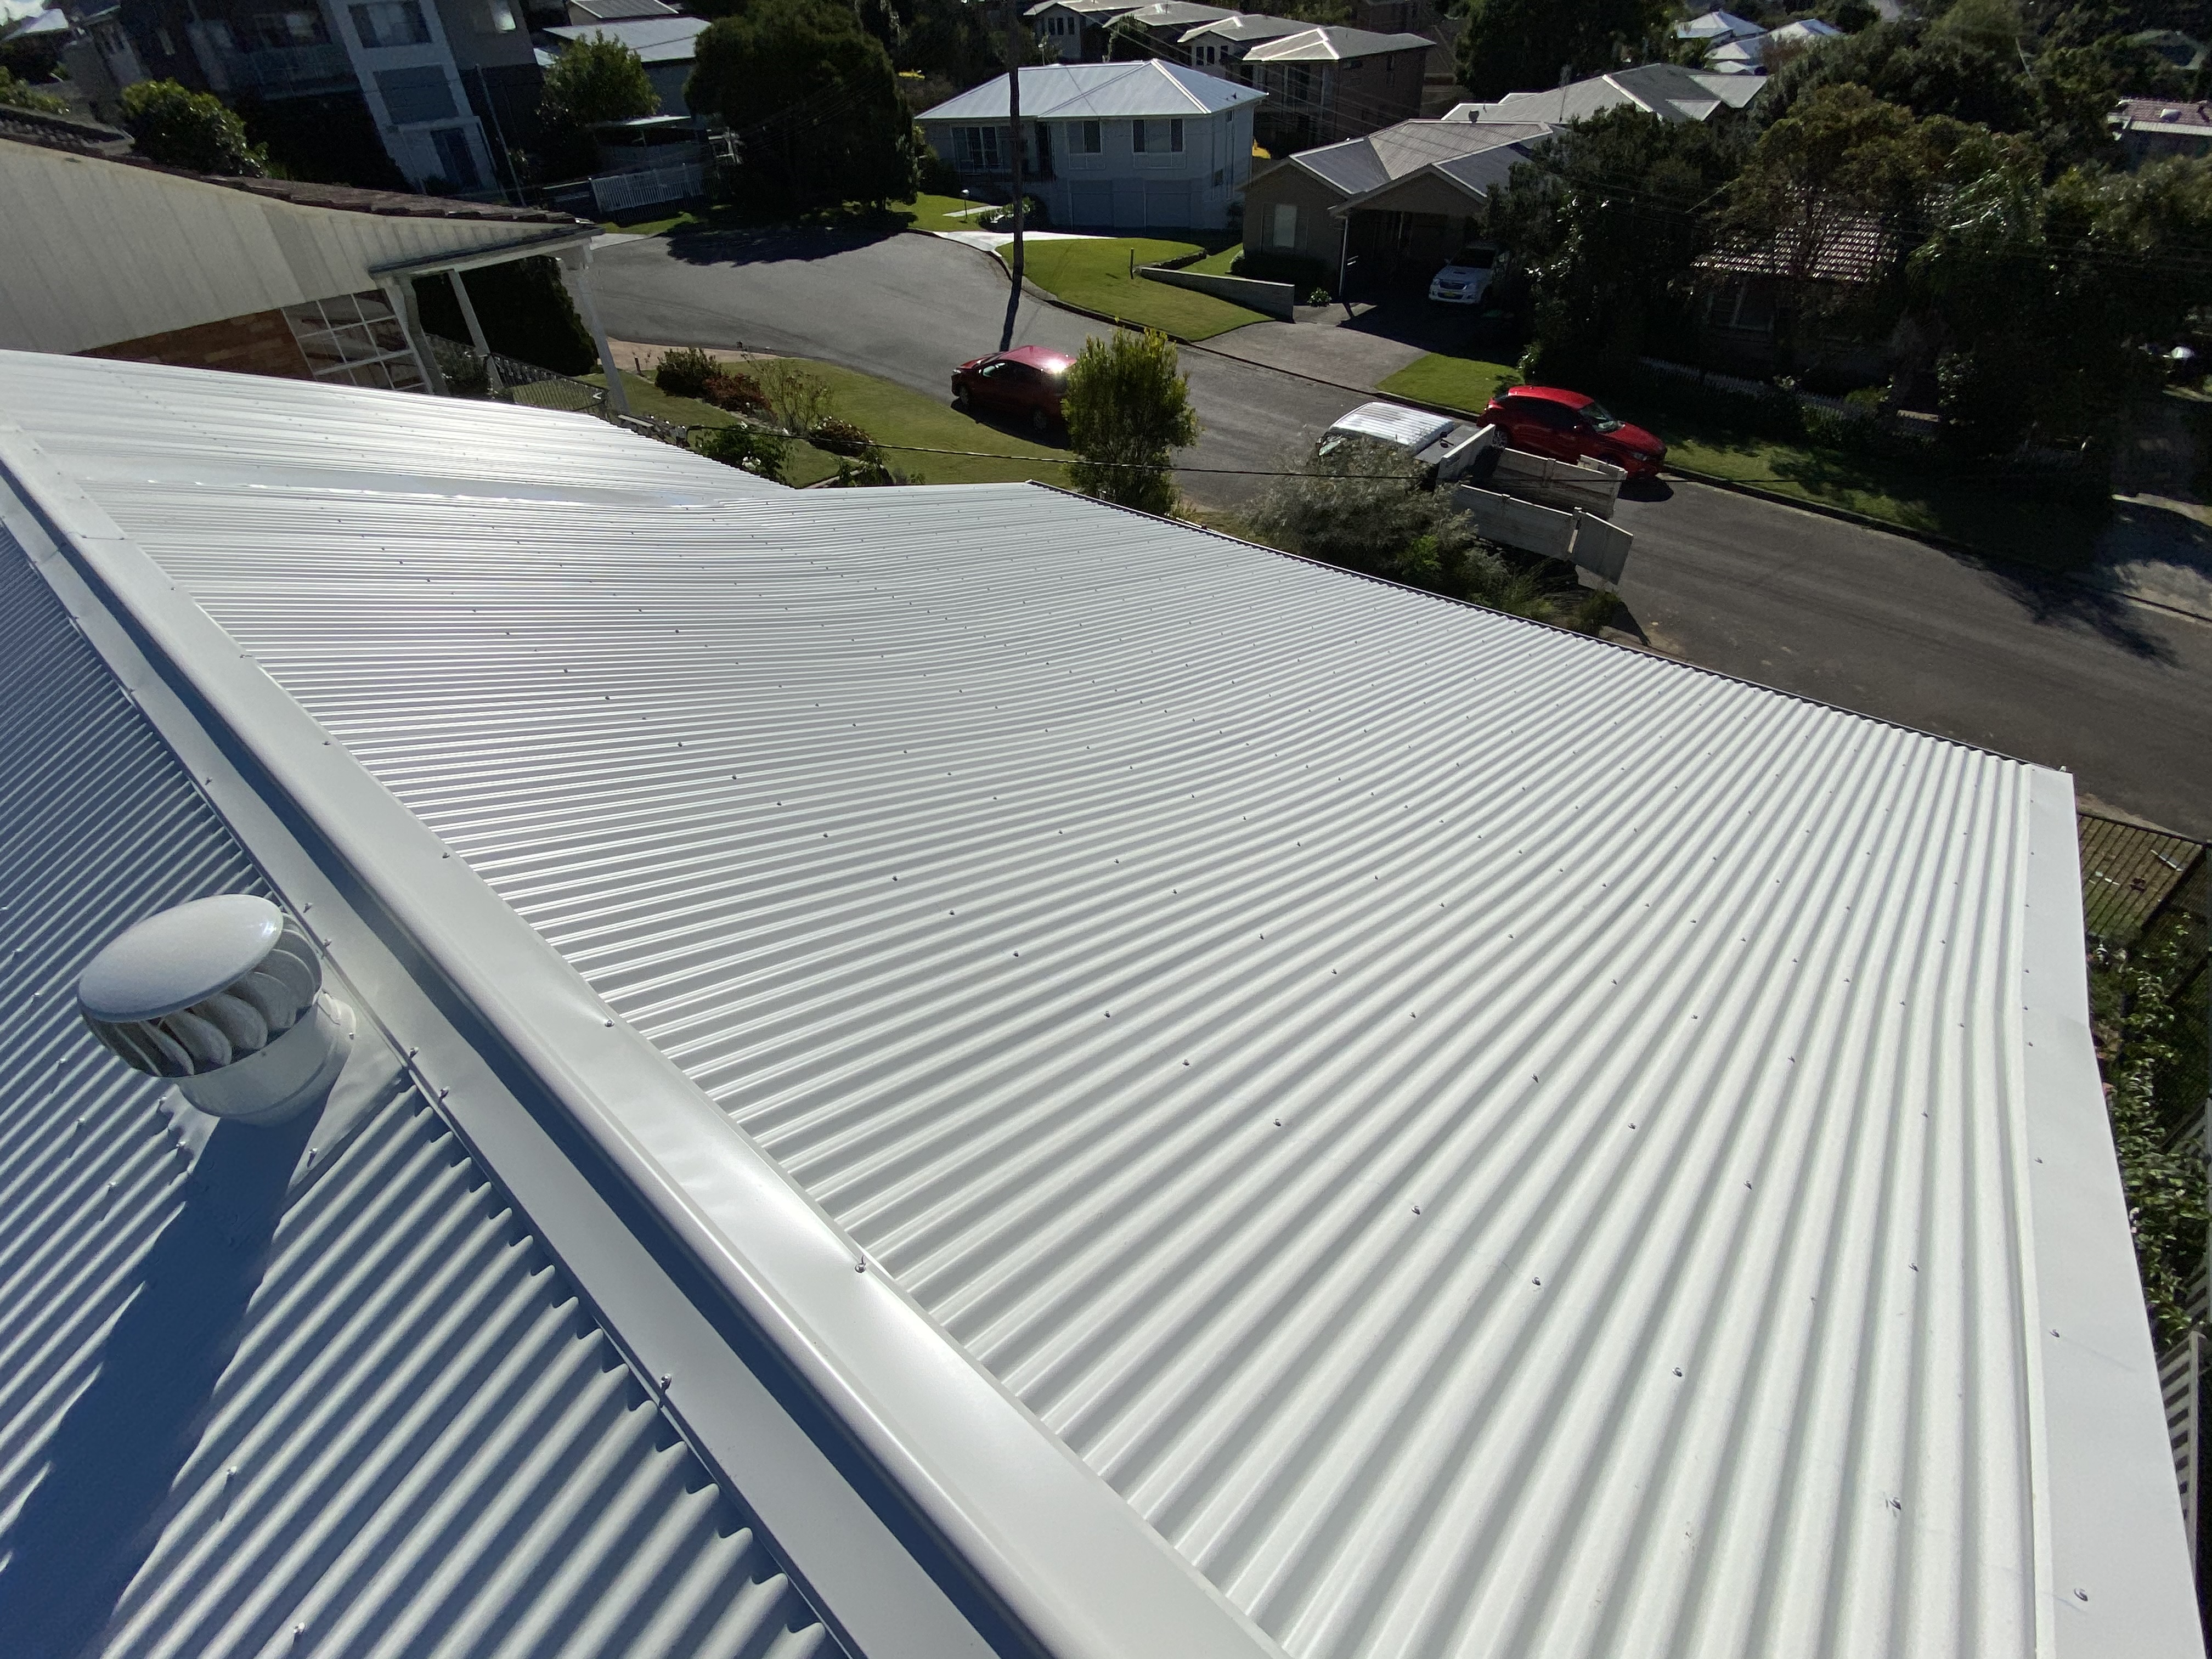 Adapt Roofing Helps Local Residents Choose the Right Roofing Solution for the Demands of Local Weather Conditions and Continuing La Niña Deluges